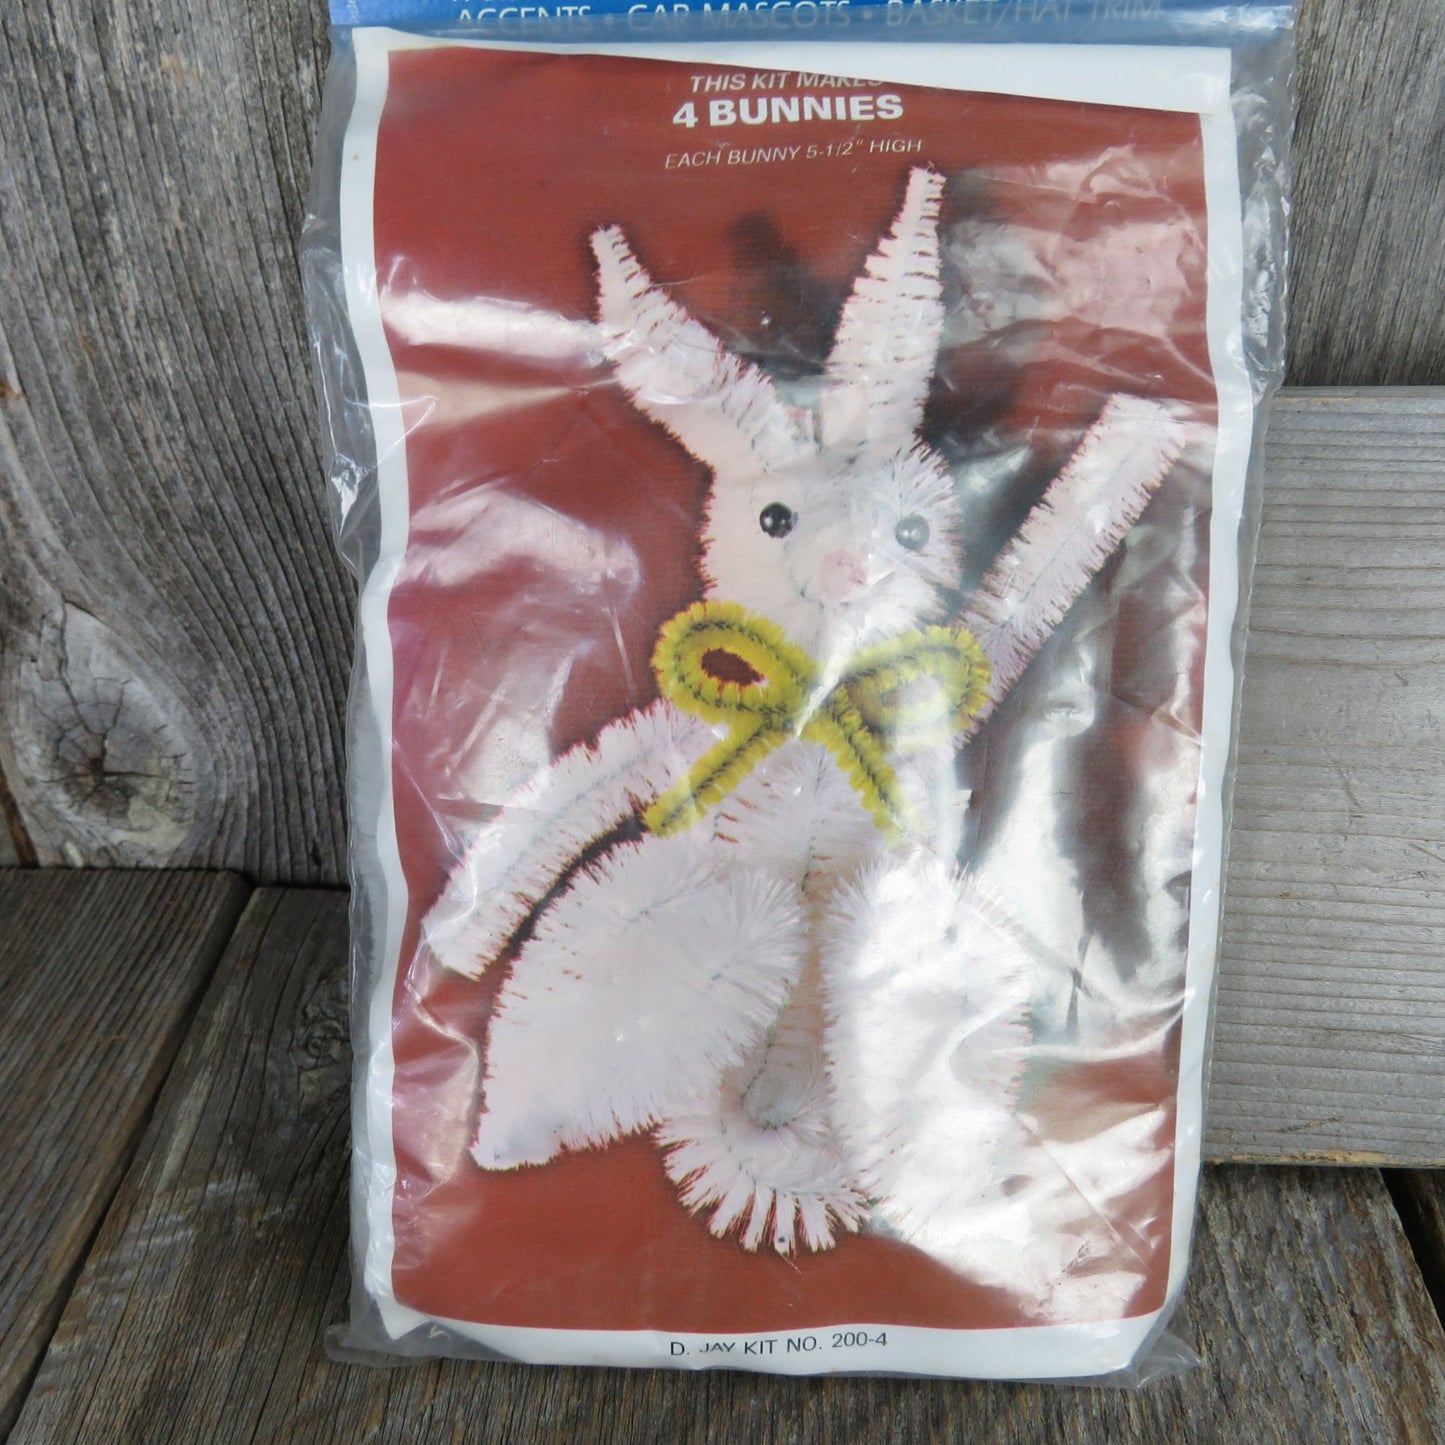 White Bunny Craft Kit Chenille-etts Projects Blue Jay Brand Easter Rabbit Pipe Cleaner Chenille Art Kids Activities Made in USA